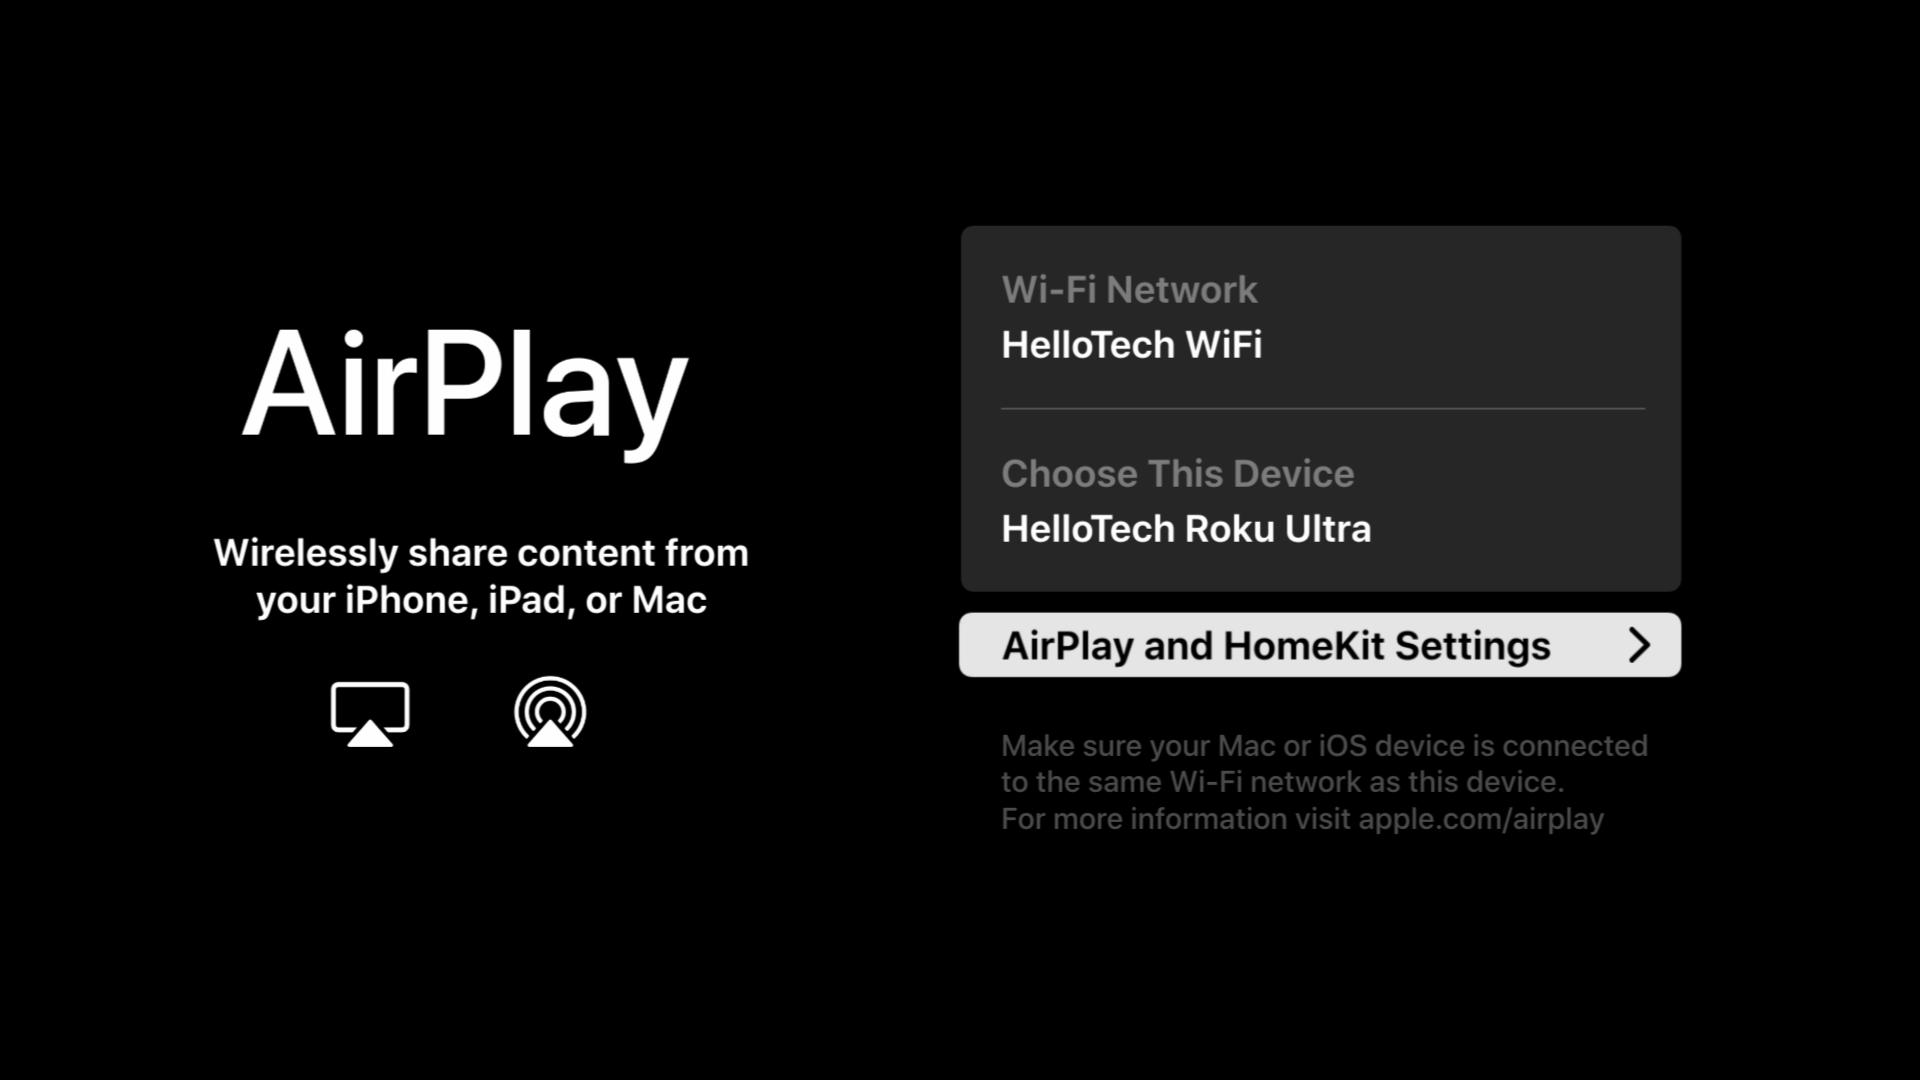 AirPlay Apple TV on Hisense Android TV